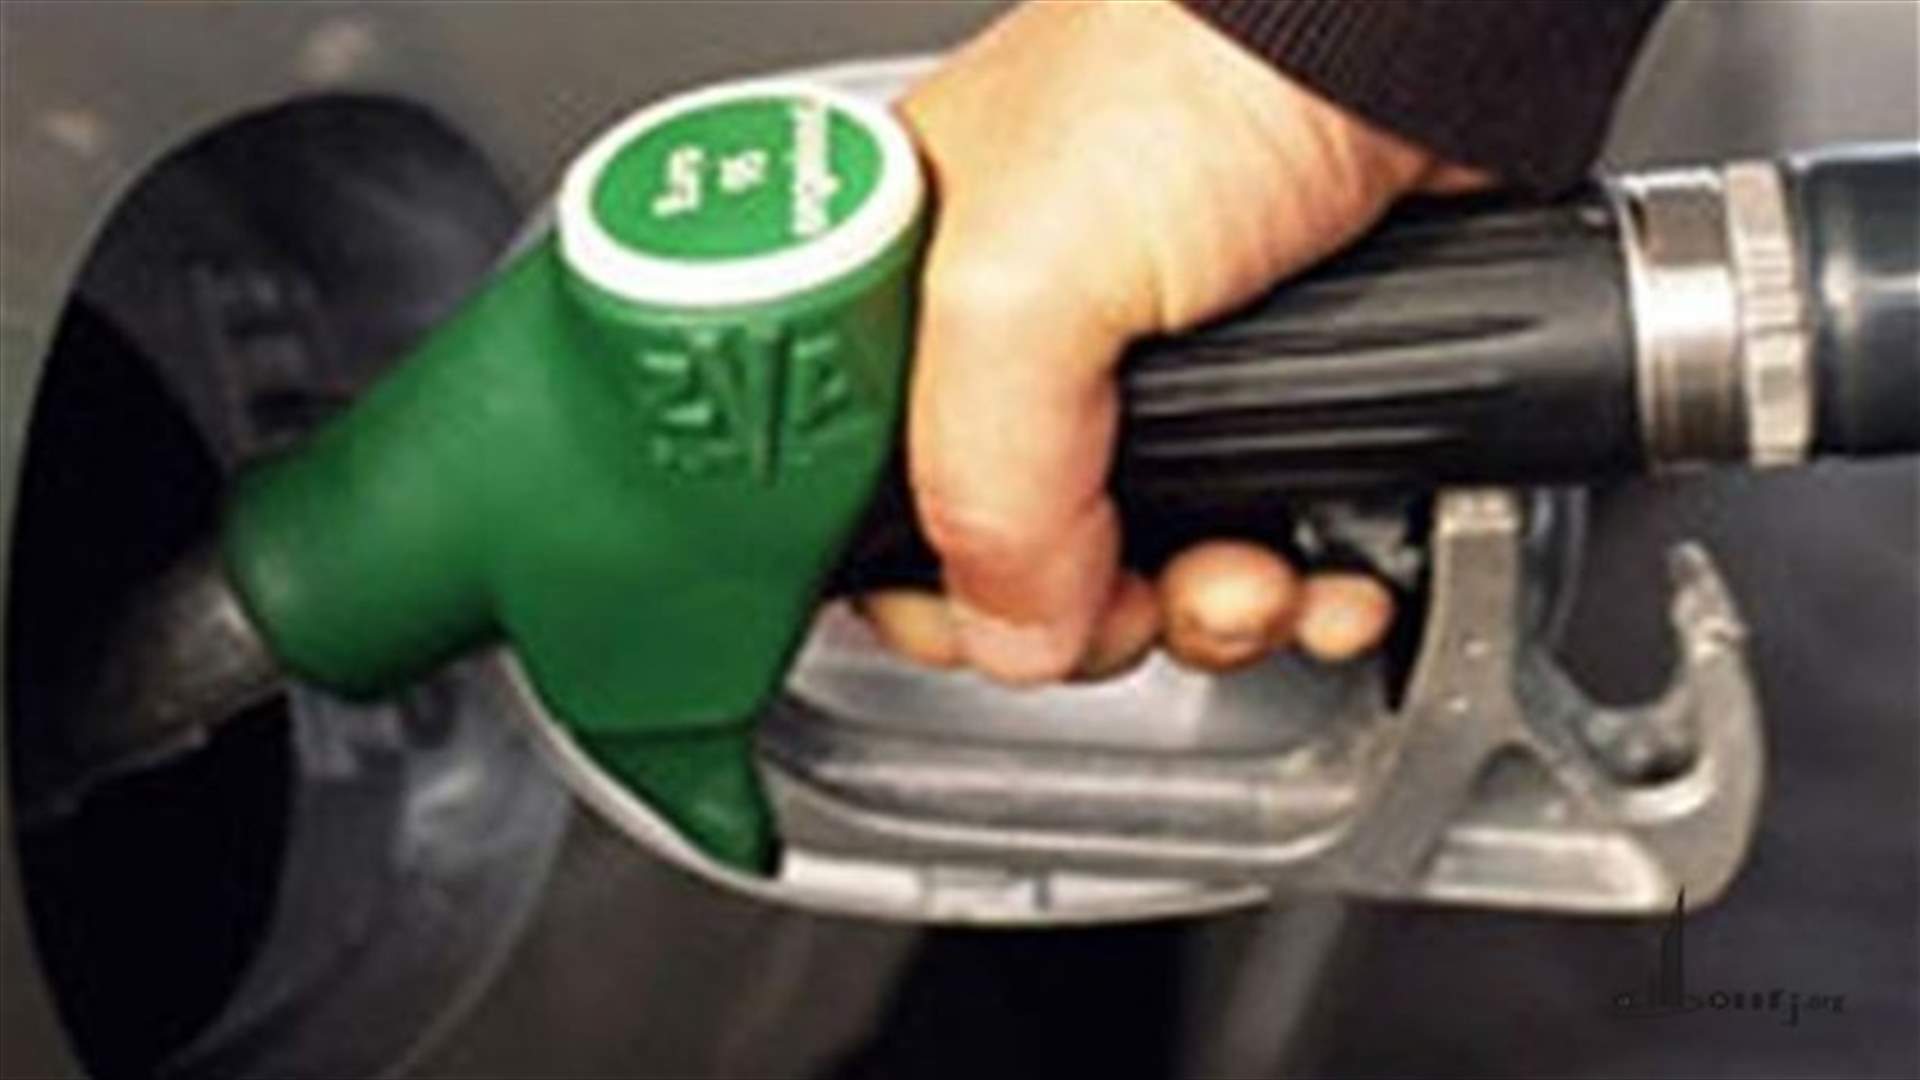 Fuel prices in Lebanon continue to increase